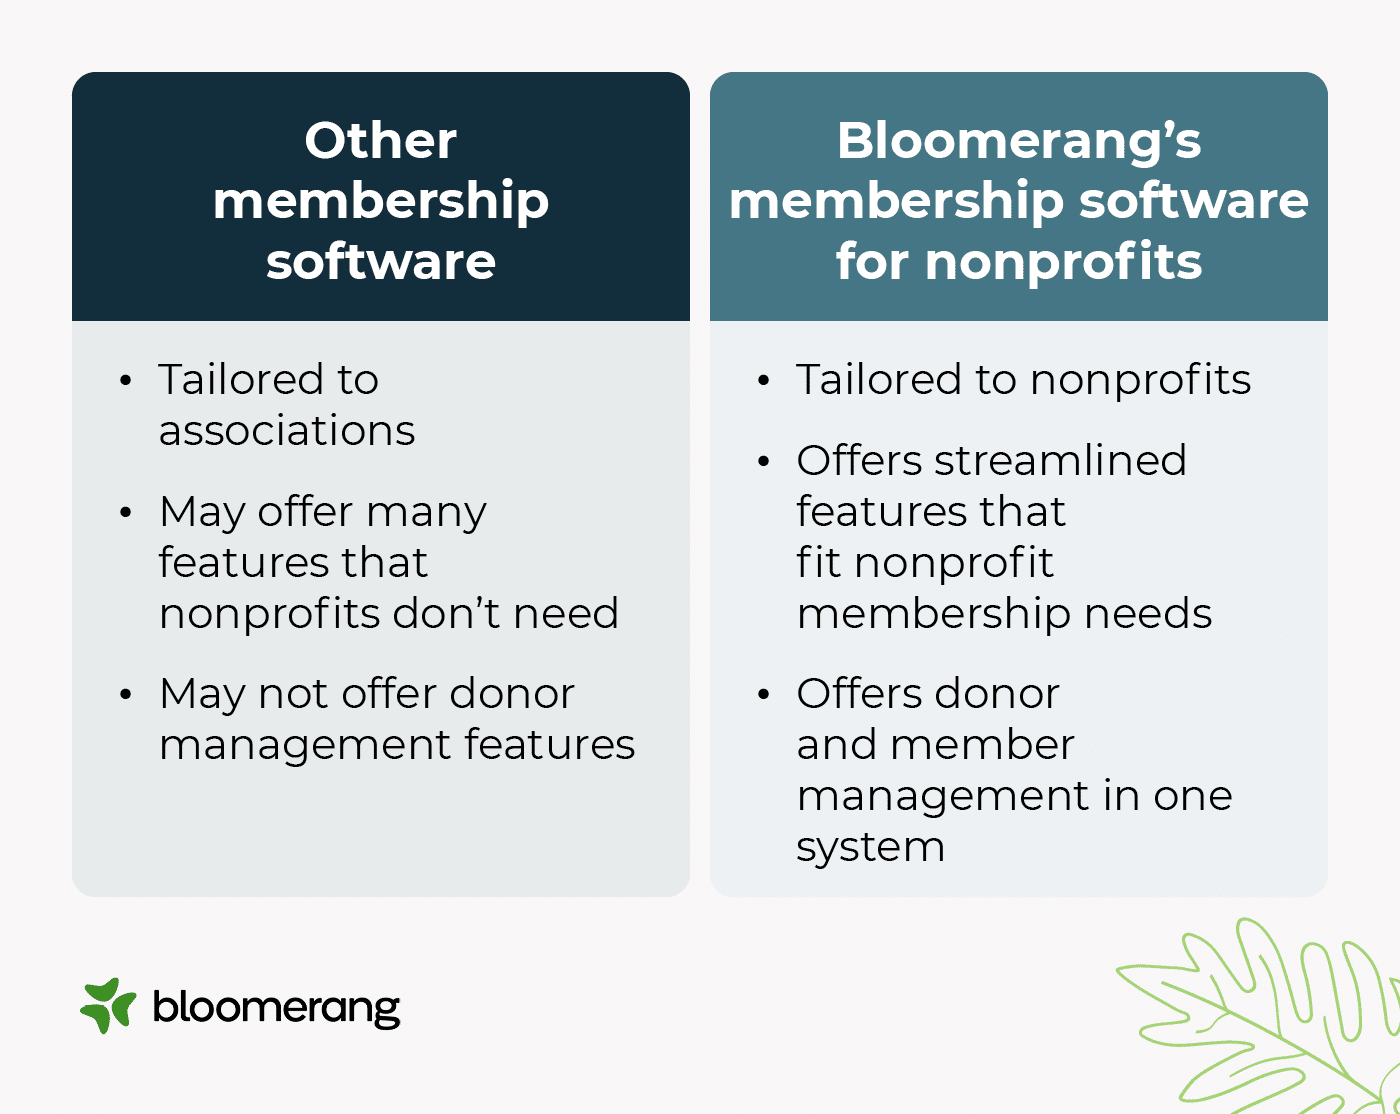 Comparison of Bloomerang’s membership software for nonprofits with other membership software